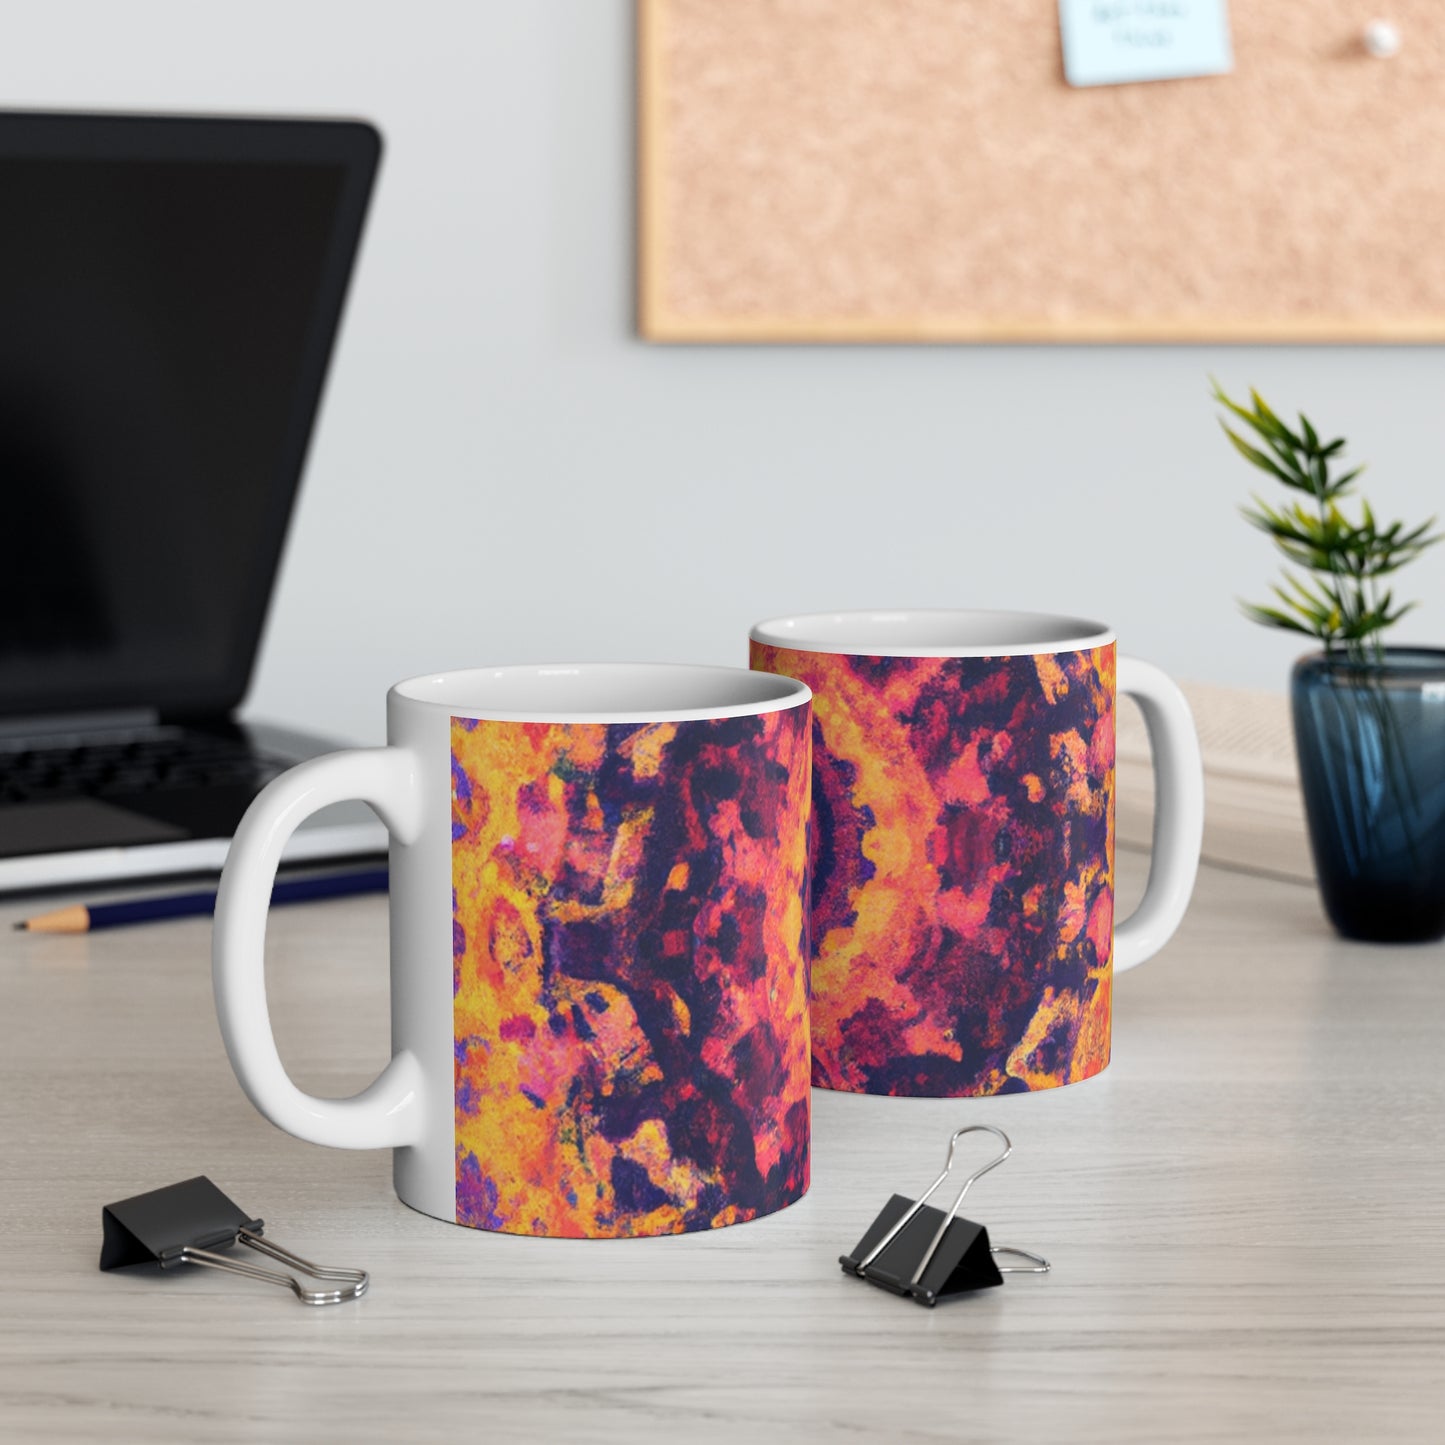 Fiona's Finest Coffee - Psychedelic Coffee Cup Mug 11 Ounce